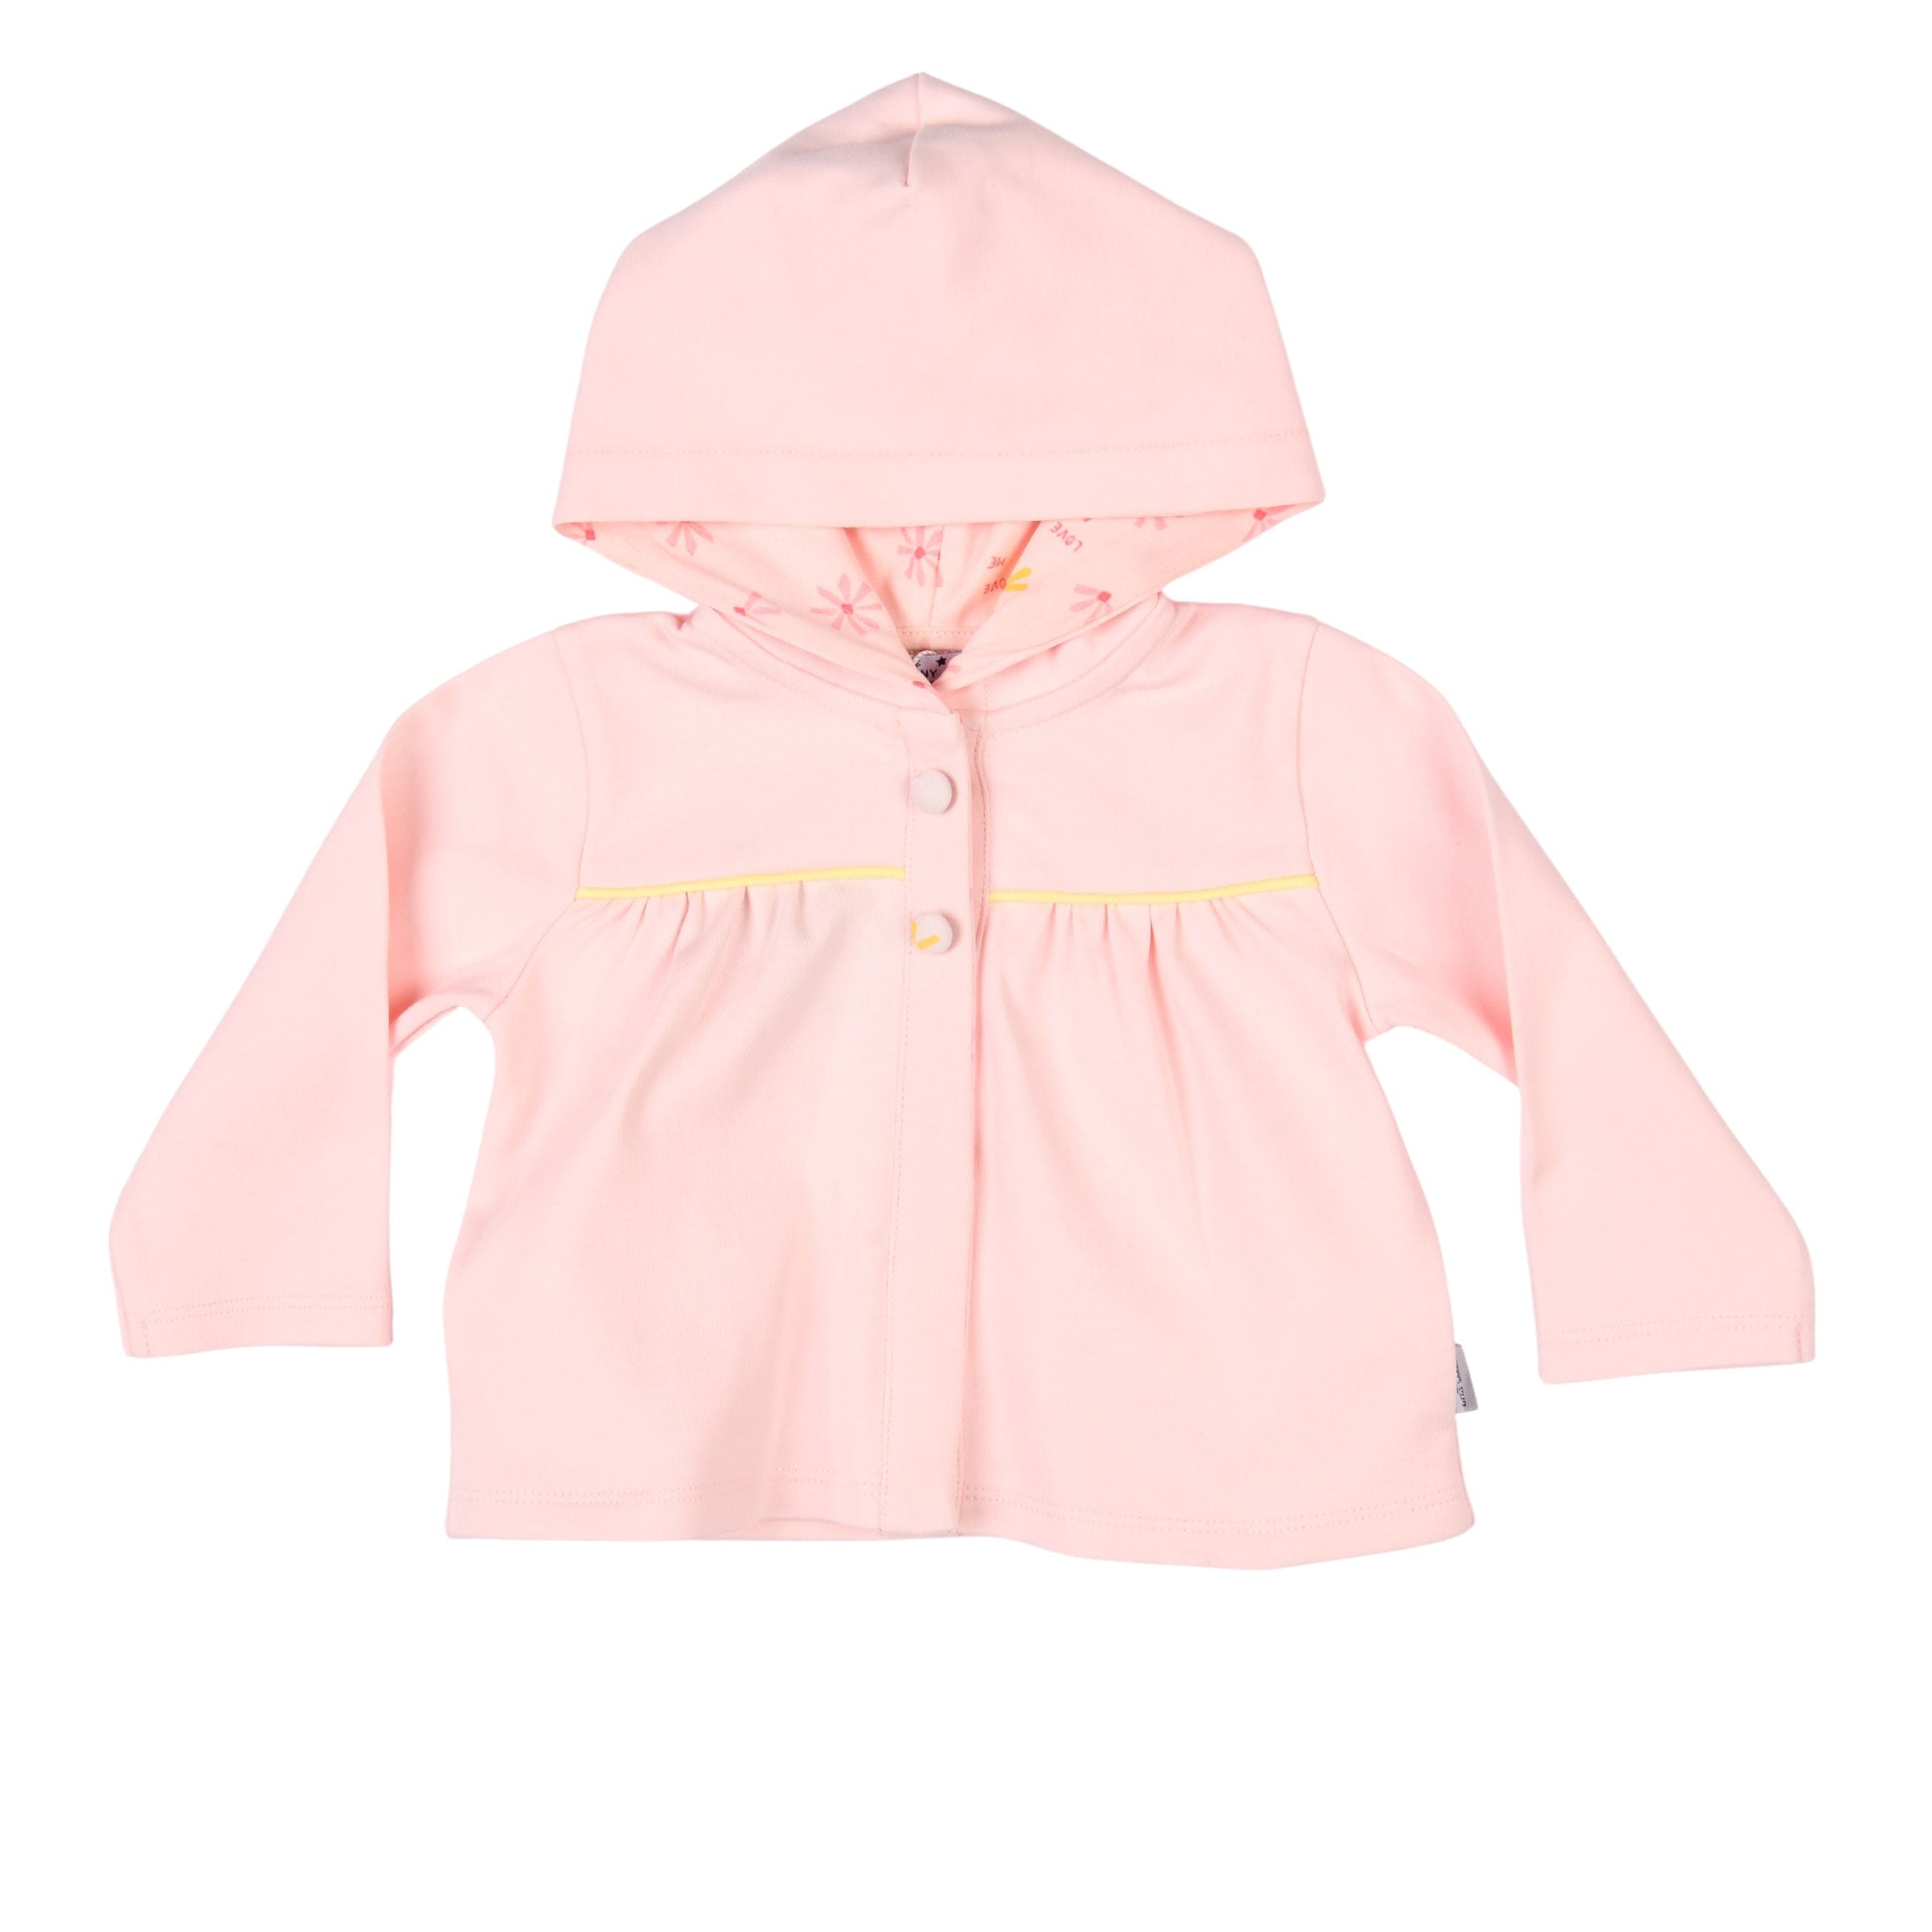 Pale Pink Baby Jacket With Yellow Piping